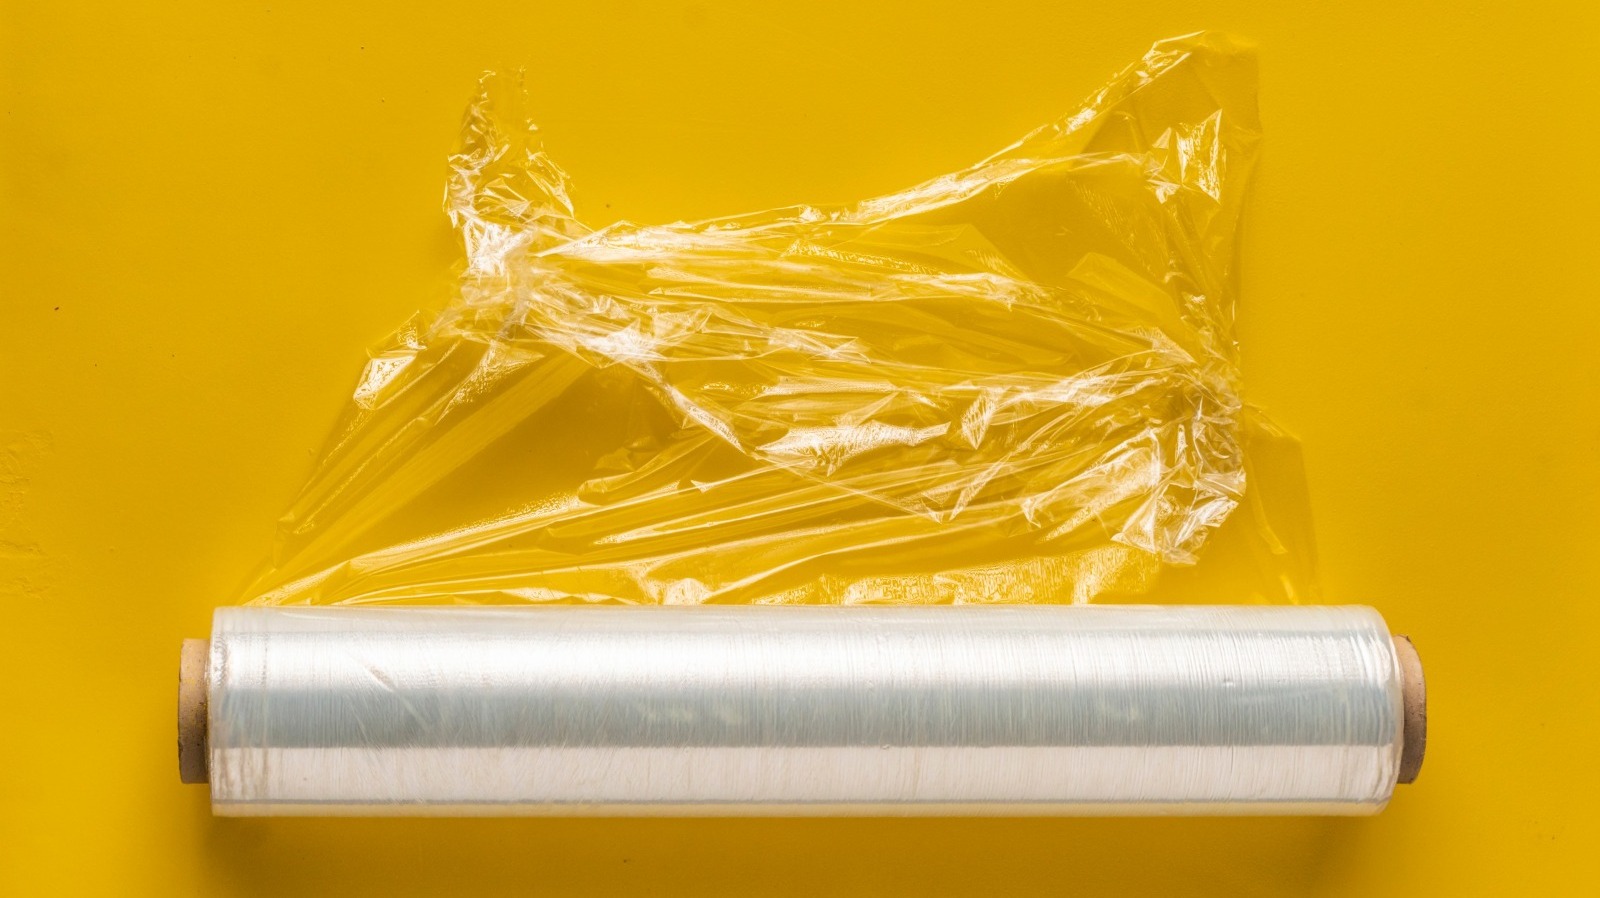 https://www.tastingtable.com/img/gallery/the-reason-you-shouldnt-put-plastic-wraps-in-the-oven/l-intro-1647144914.jpg